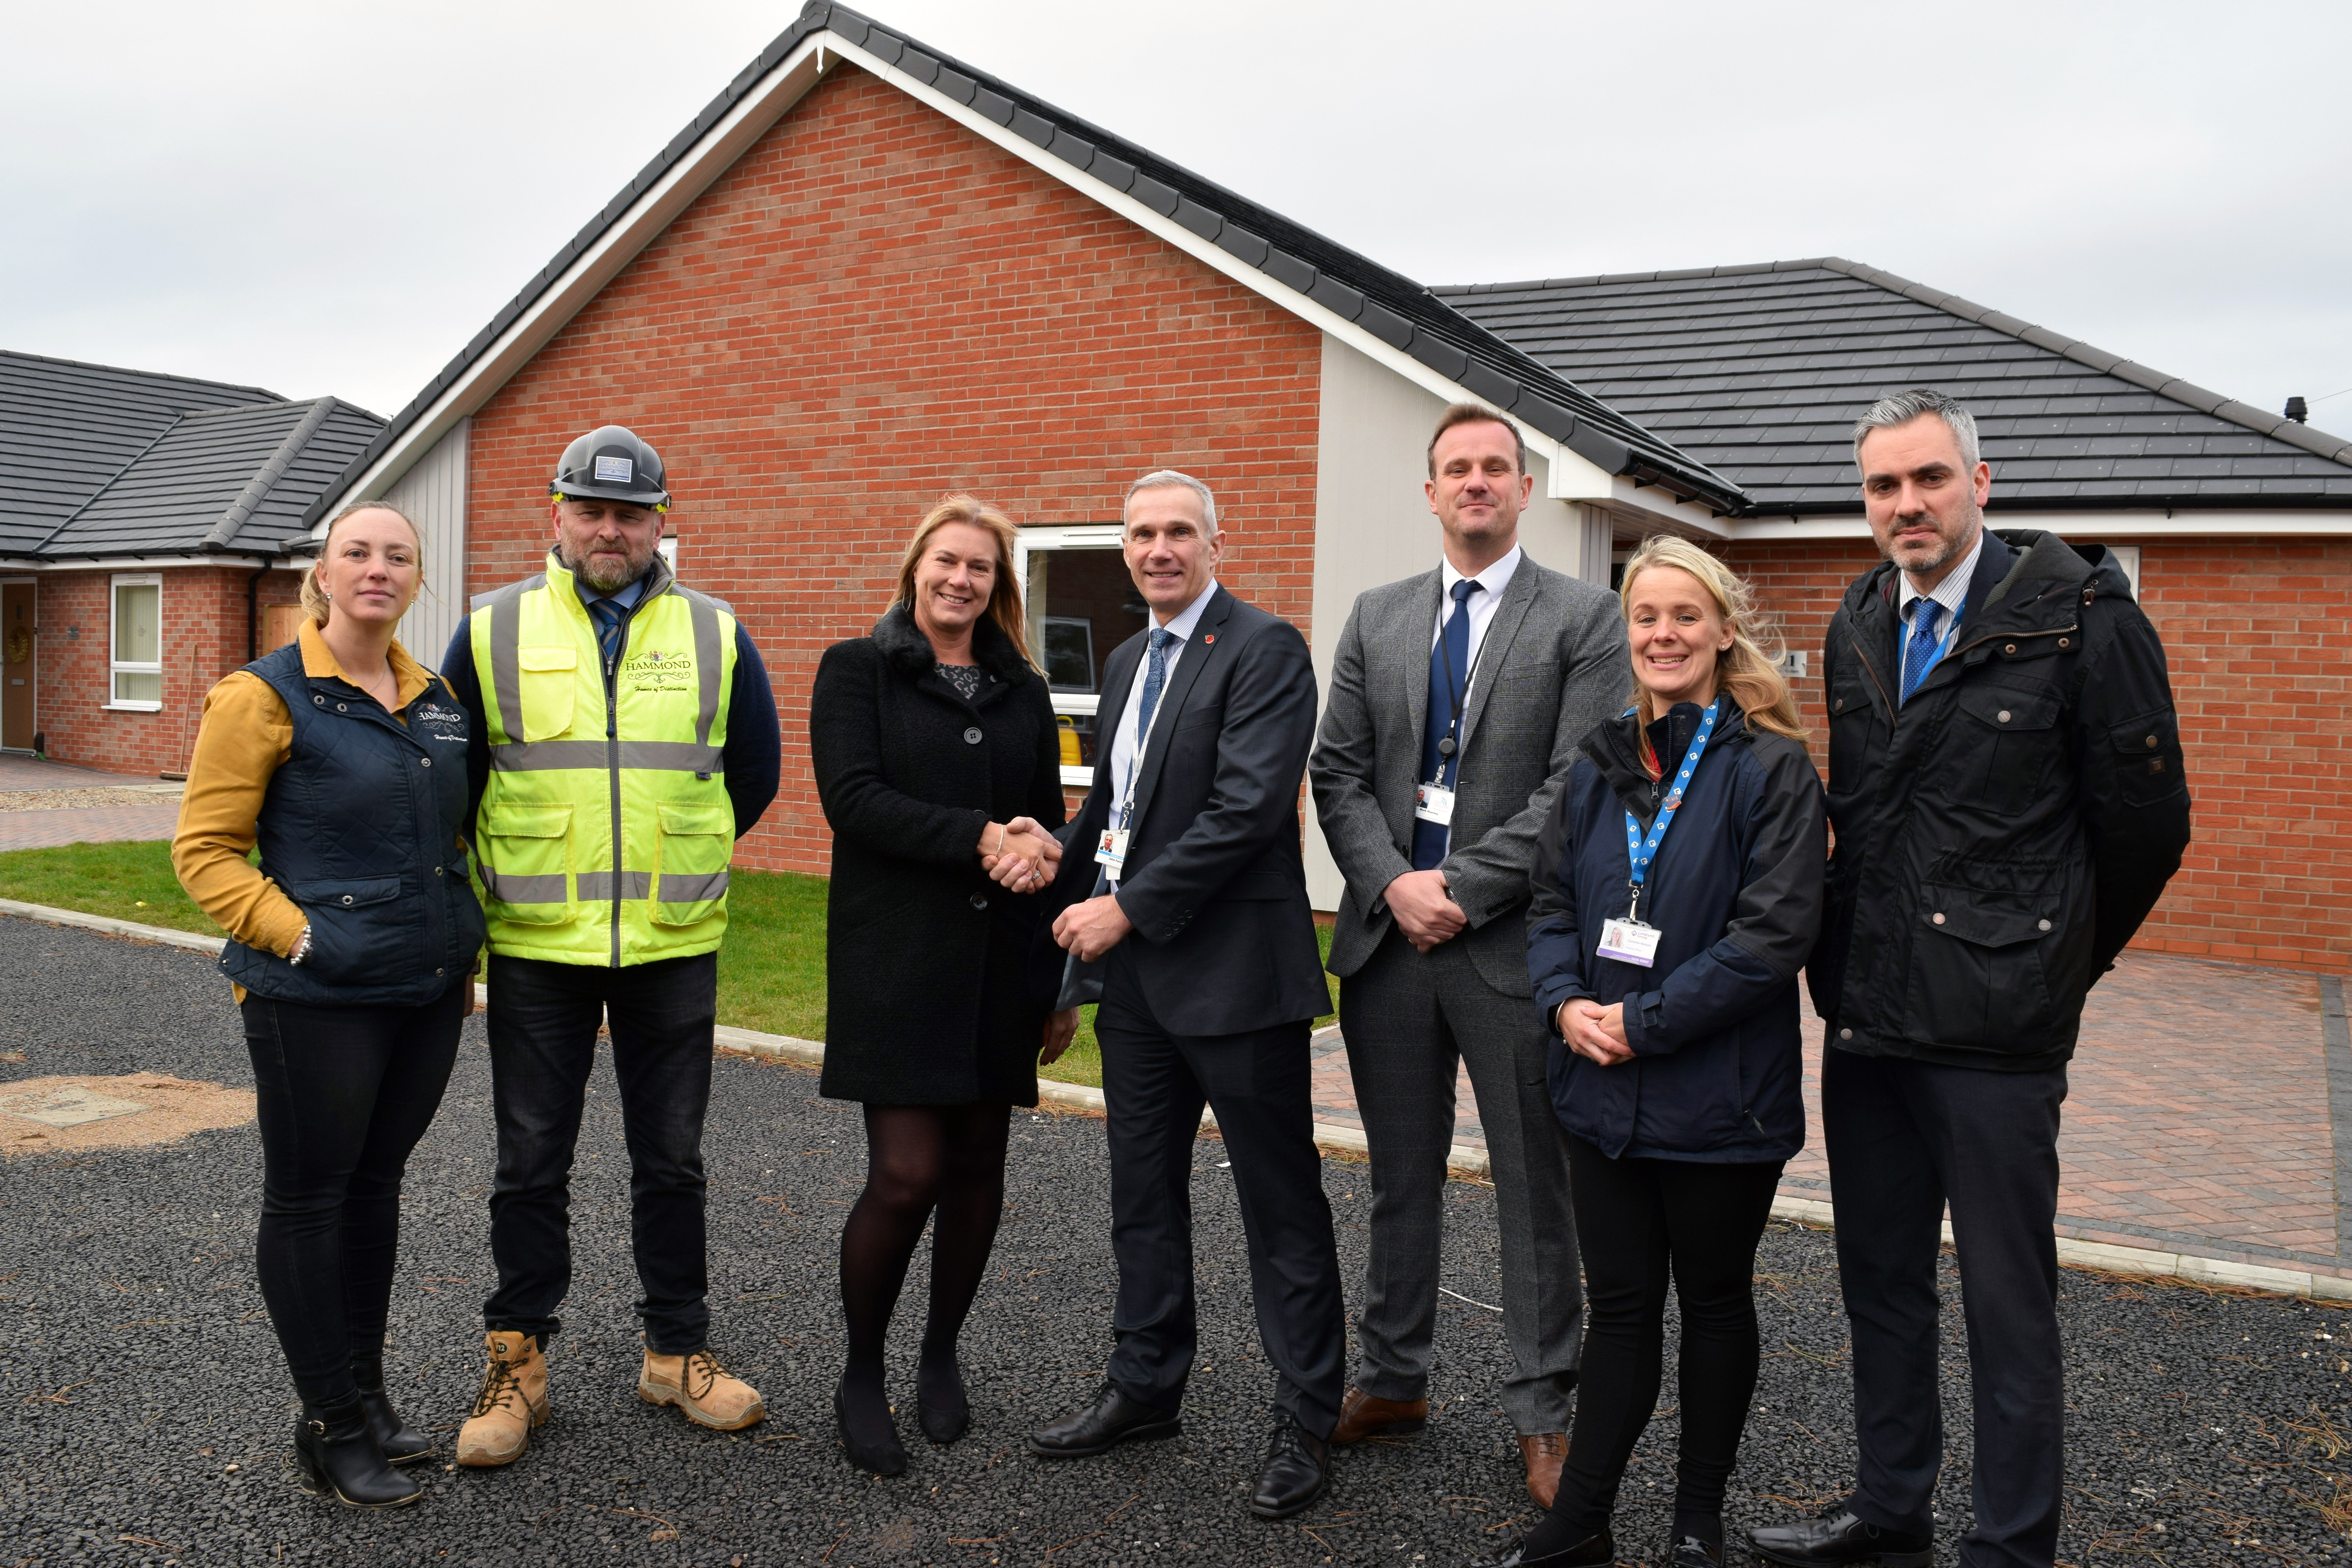 Longhurst Group Project Manager Tracey Pearson, third from left, shakes hands with Councillor John Fenty, Deputy Leader of North East Lincolnshire Council and Portfolio Holder for Housing, Regeneration and Skills. Looking on are, from left, Debbie and Nick Hammond of Hammond Homes, Mark Nearney, Assistant Director of Housing at North East Lincolnshire Council, Longhurst Group Housing Officer Gemma Nelson and Ian Penn, Longhurst Group's Head of Development.